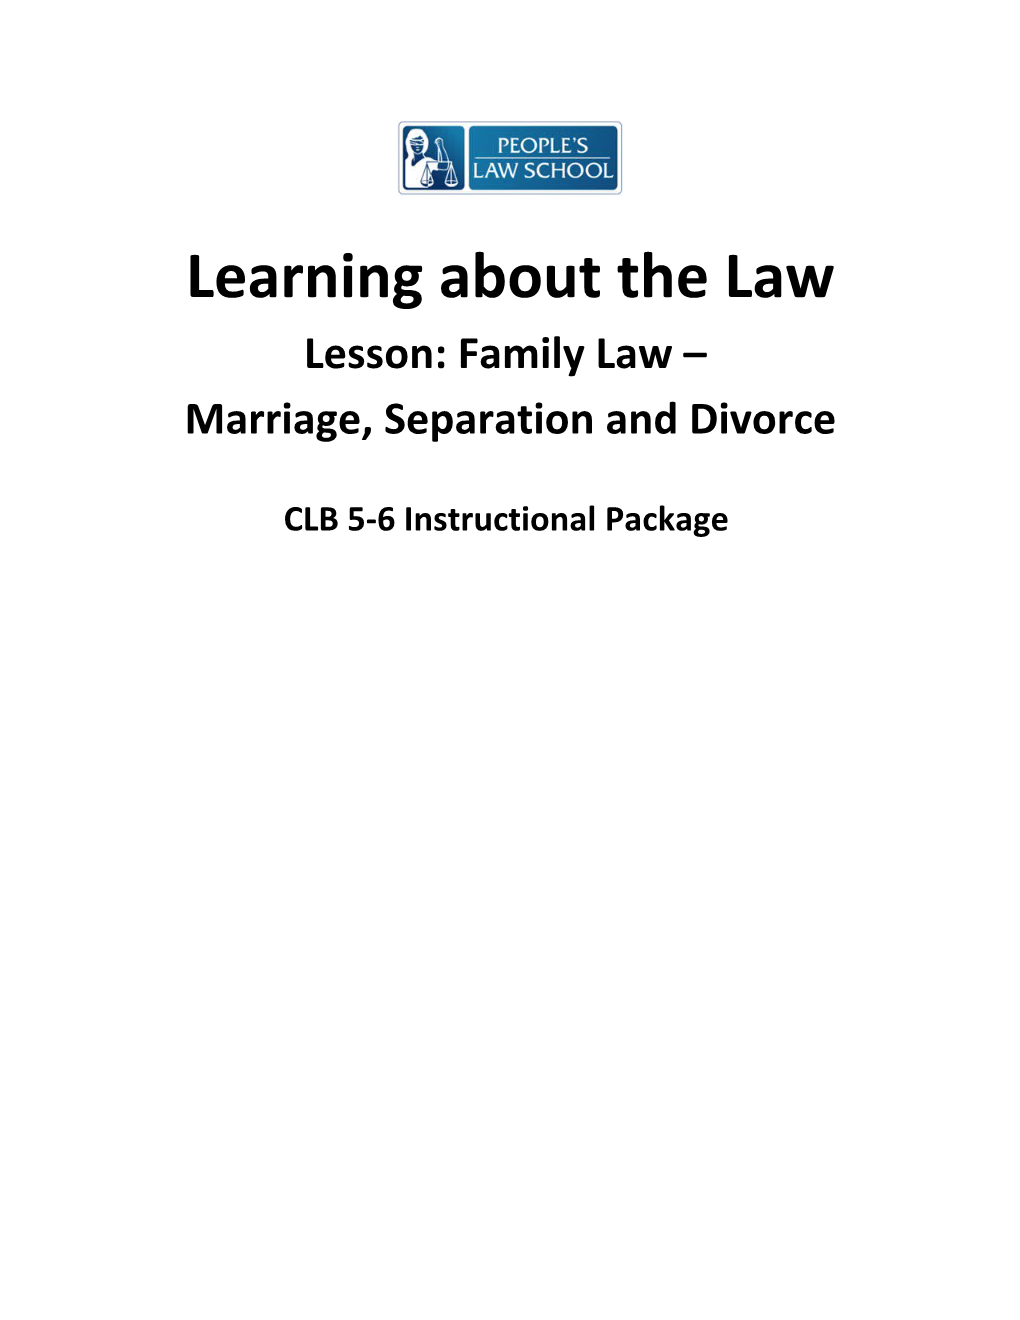 Lesson Plan: Marriage, Separation, and Divorce (CLB 5-6)